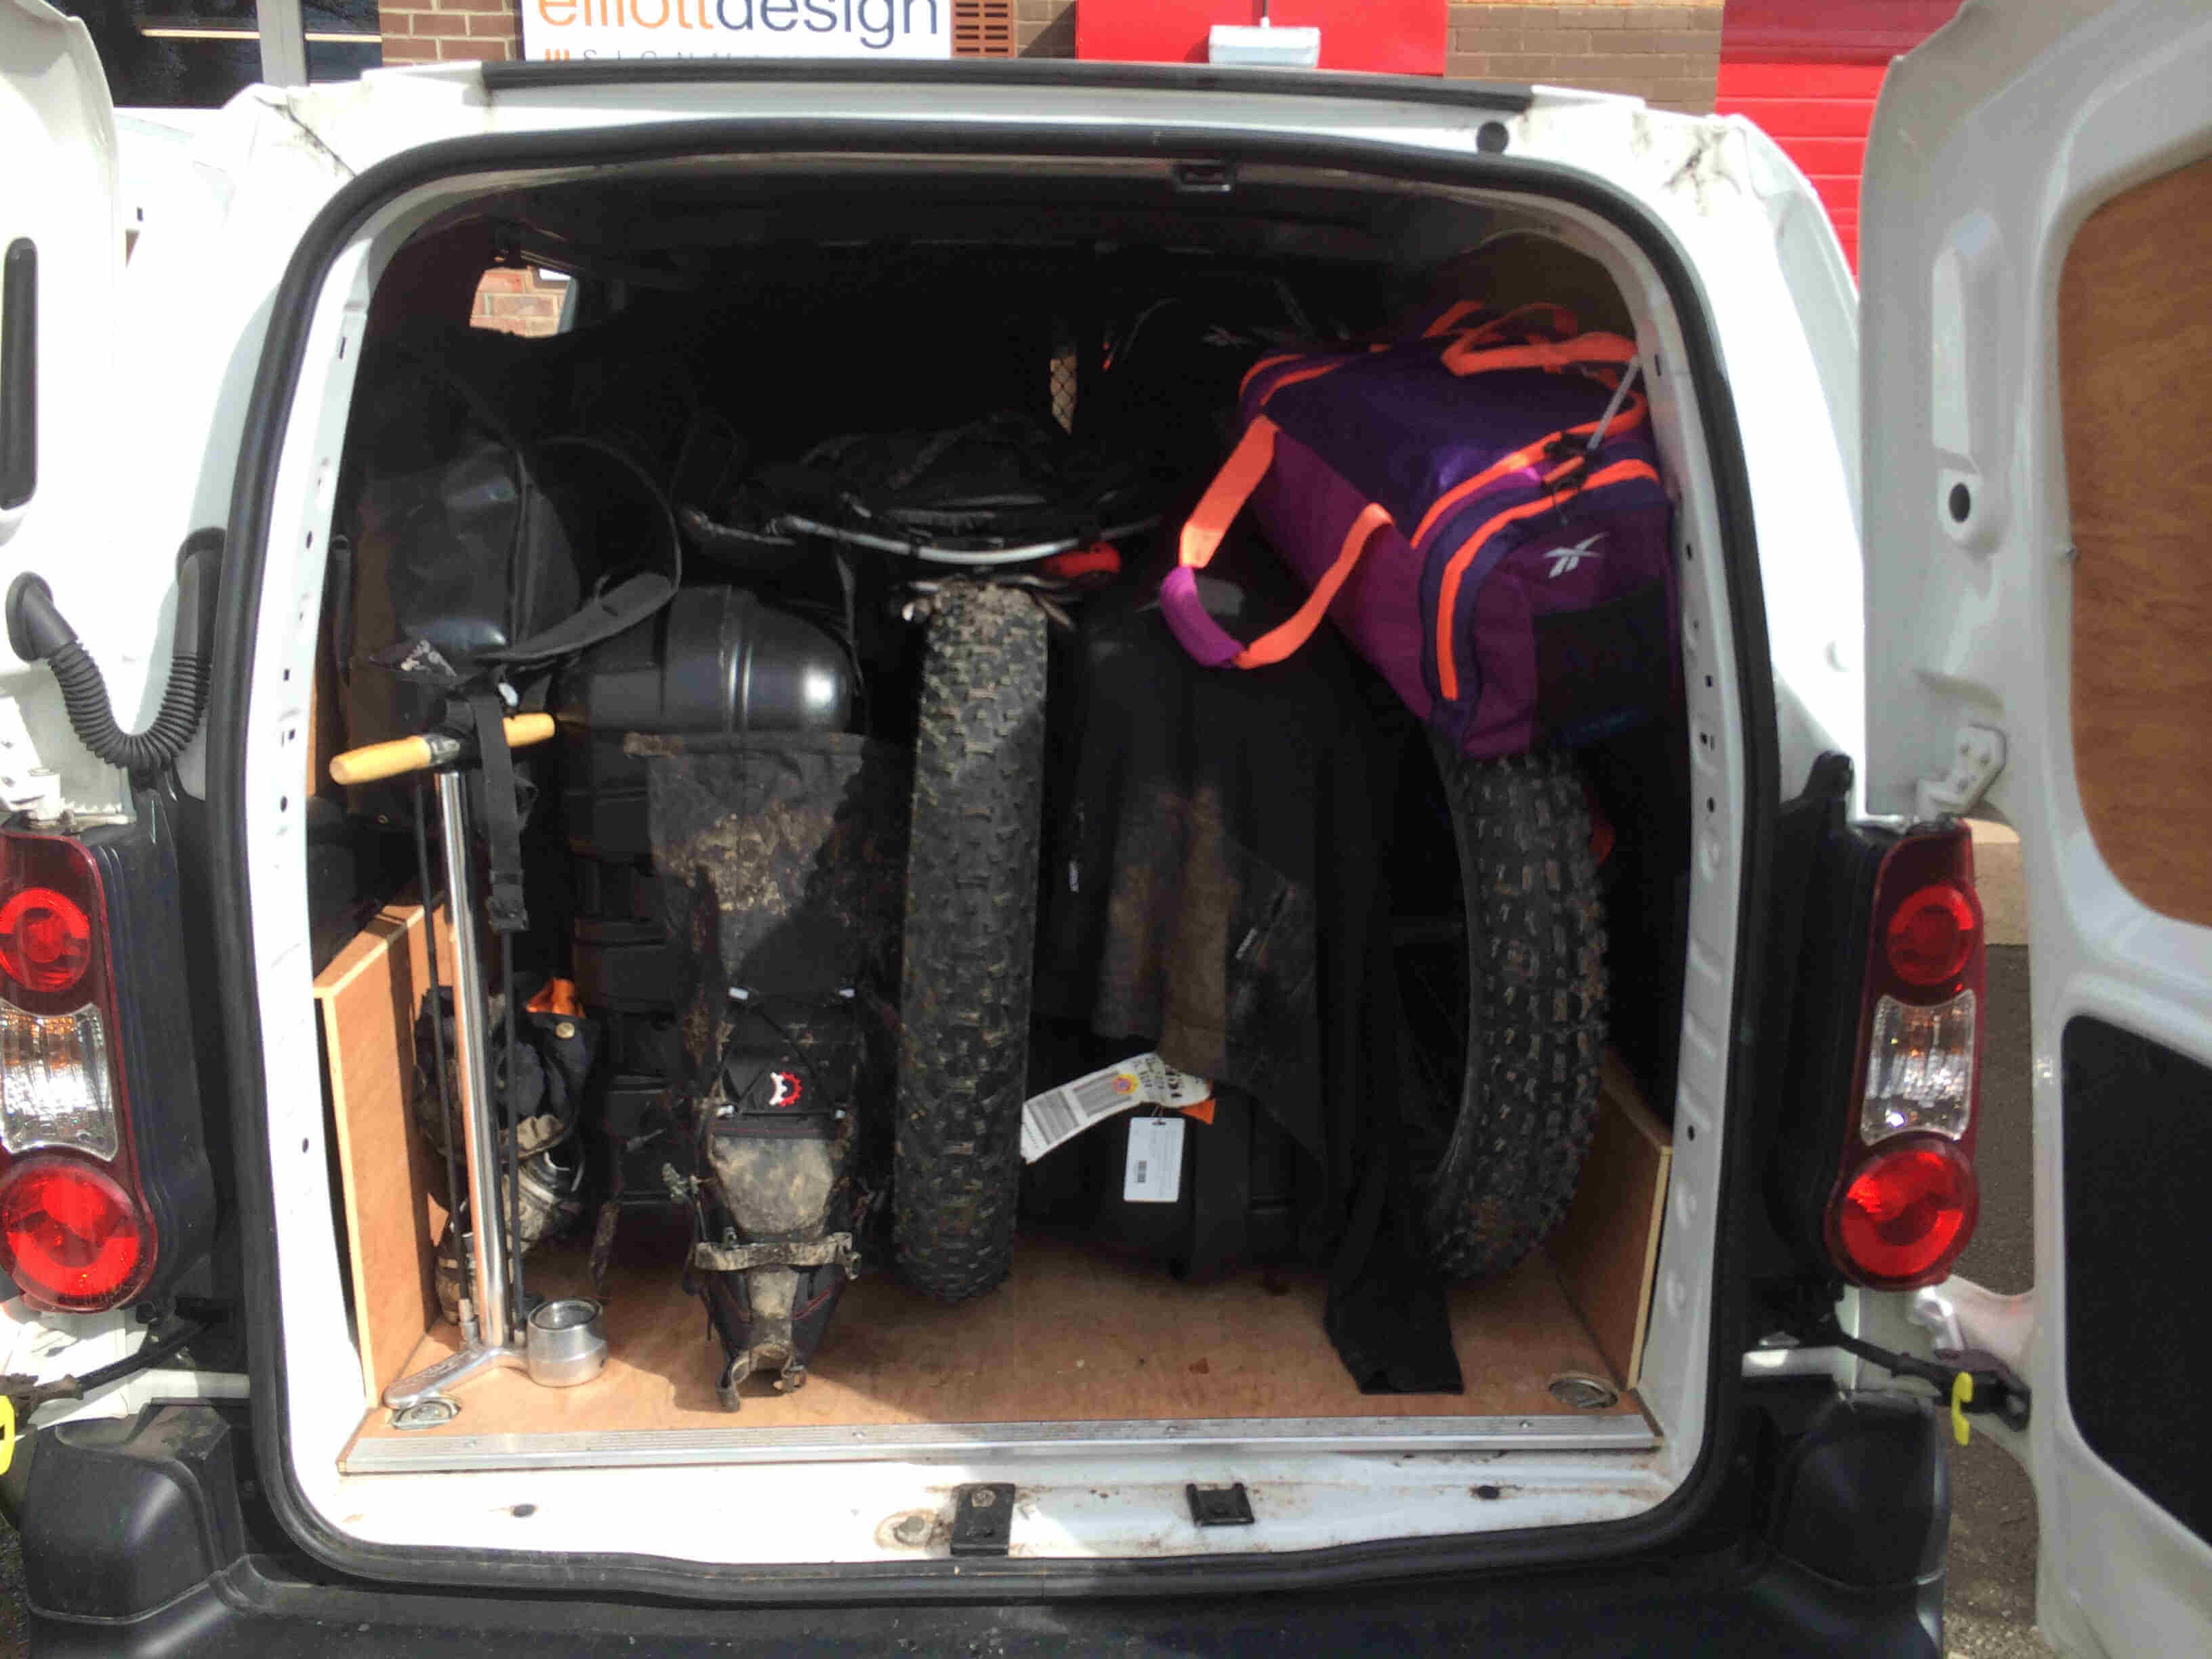 Rear view into a van with open back doors, loaded with fat bikes and gear